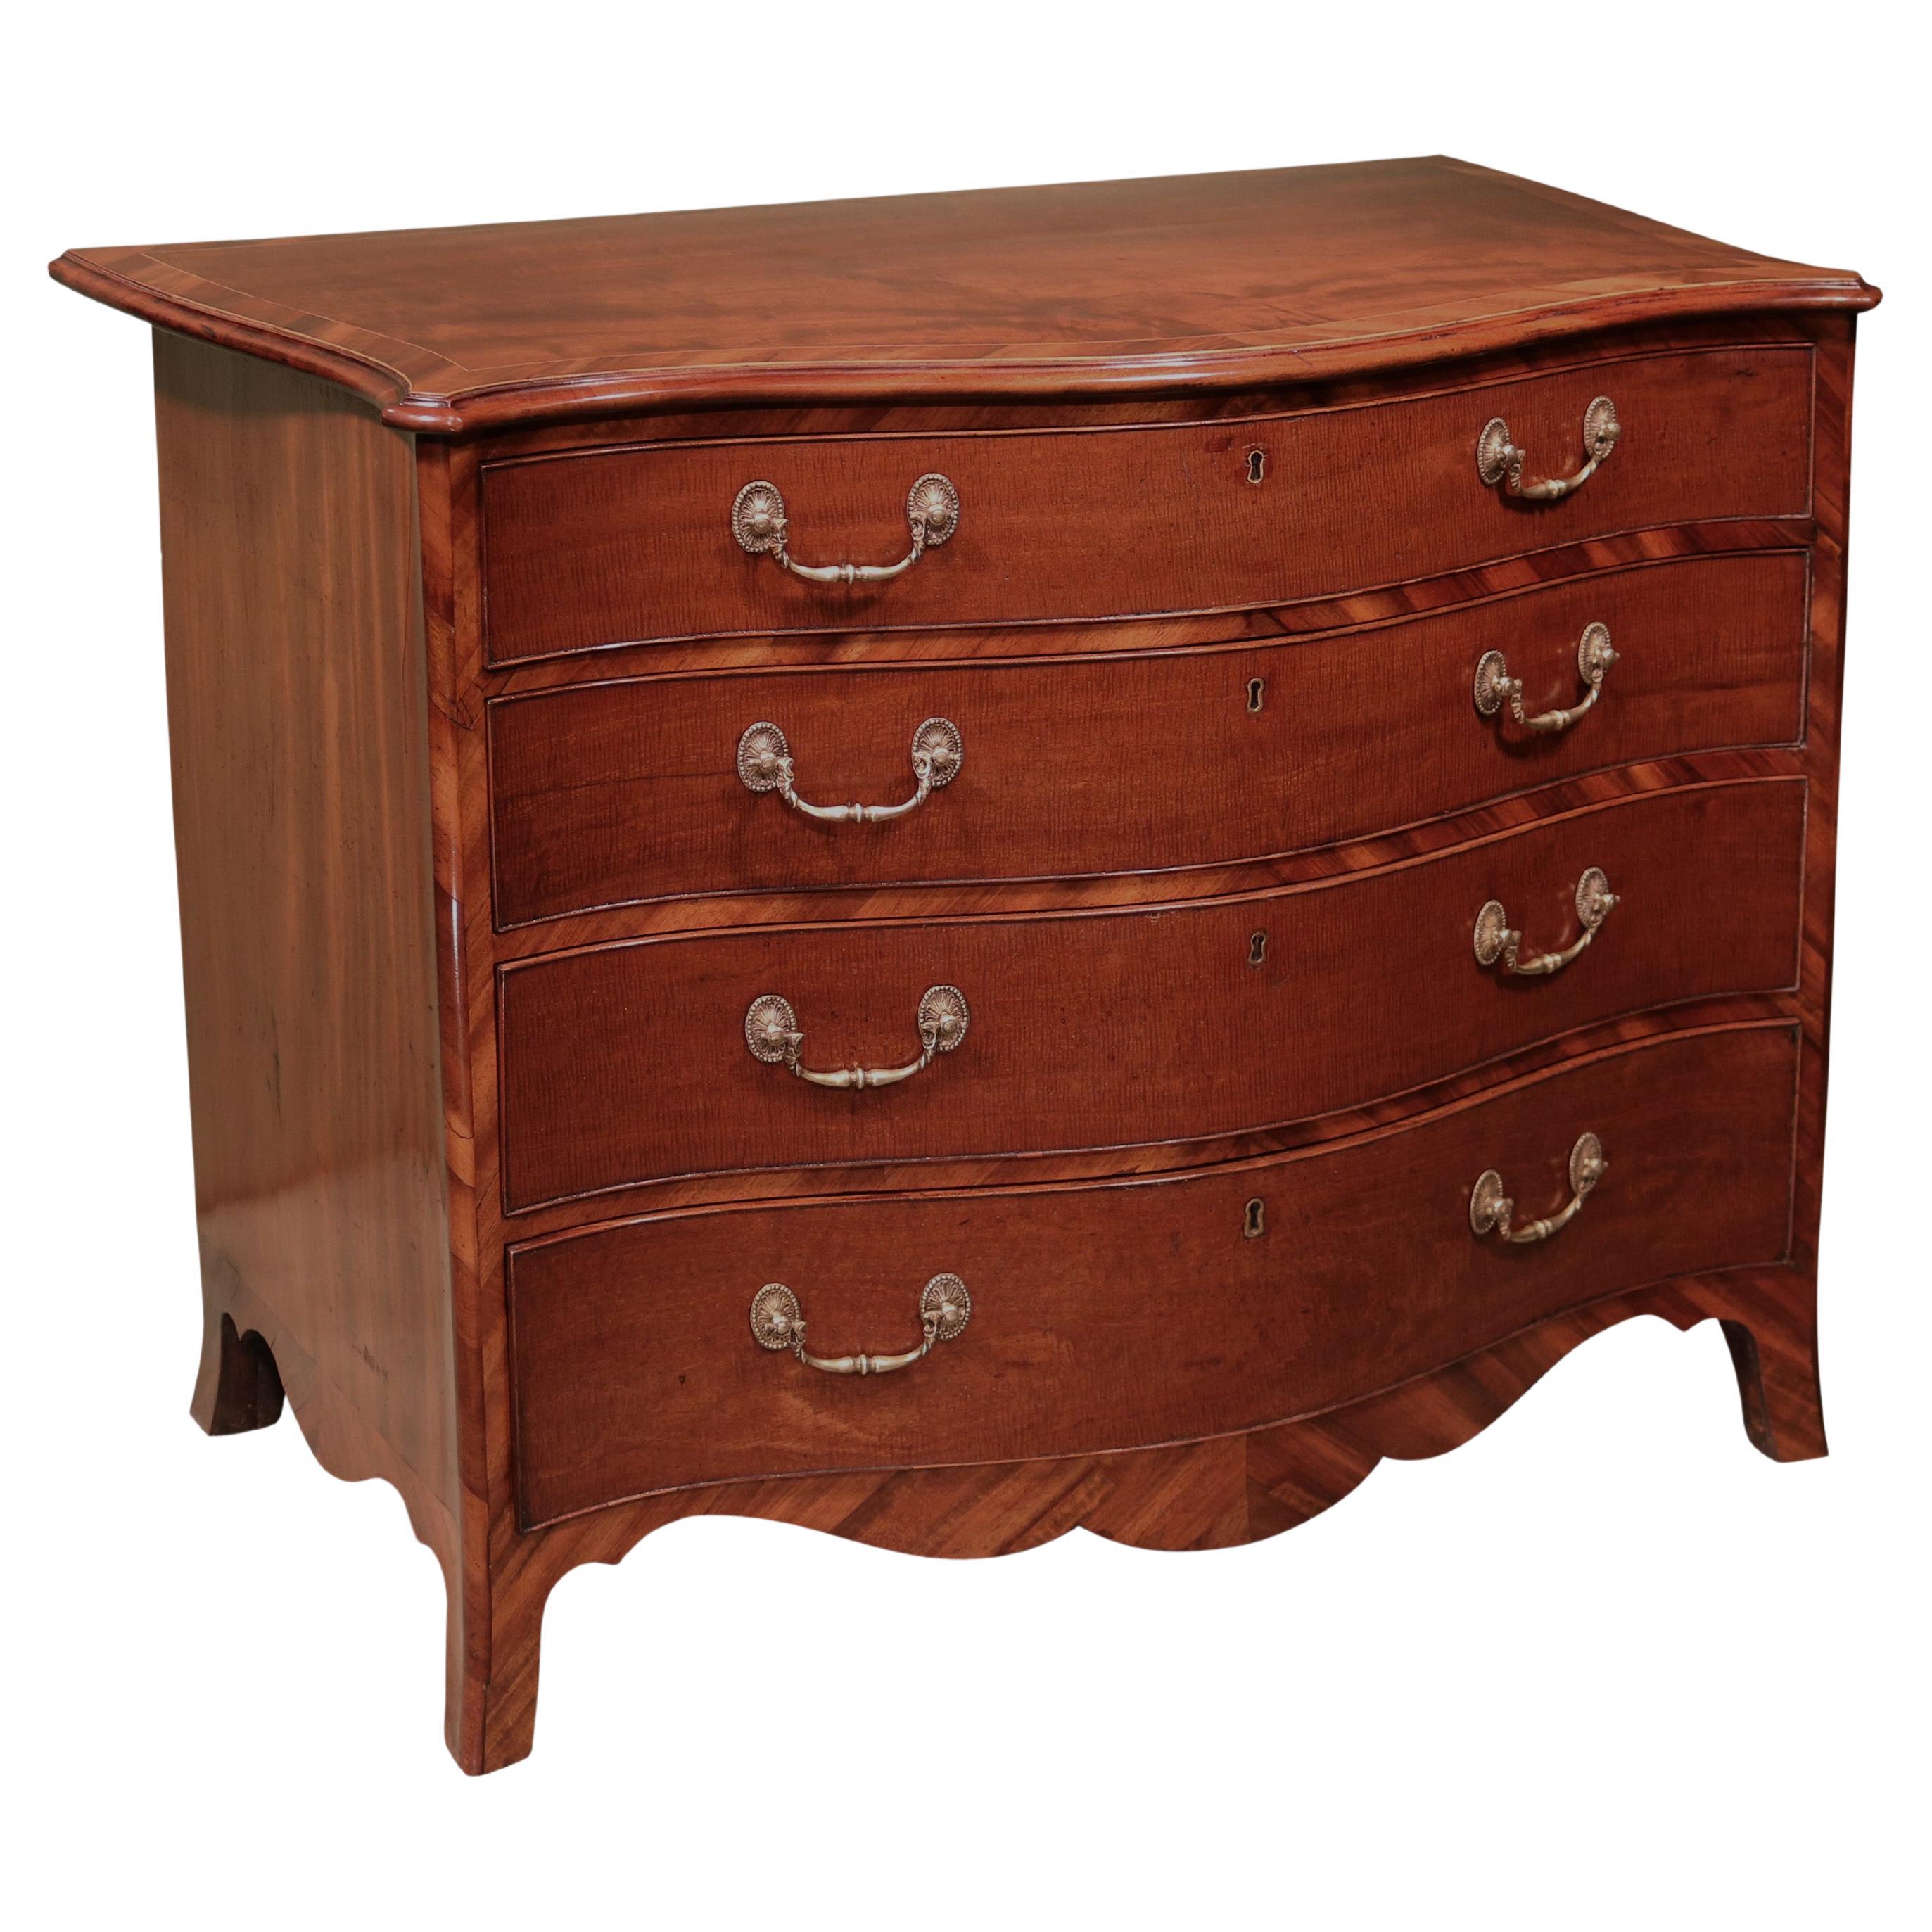 Antique George III period fiddle back mahogany serpentine chest of drawers For Sale